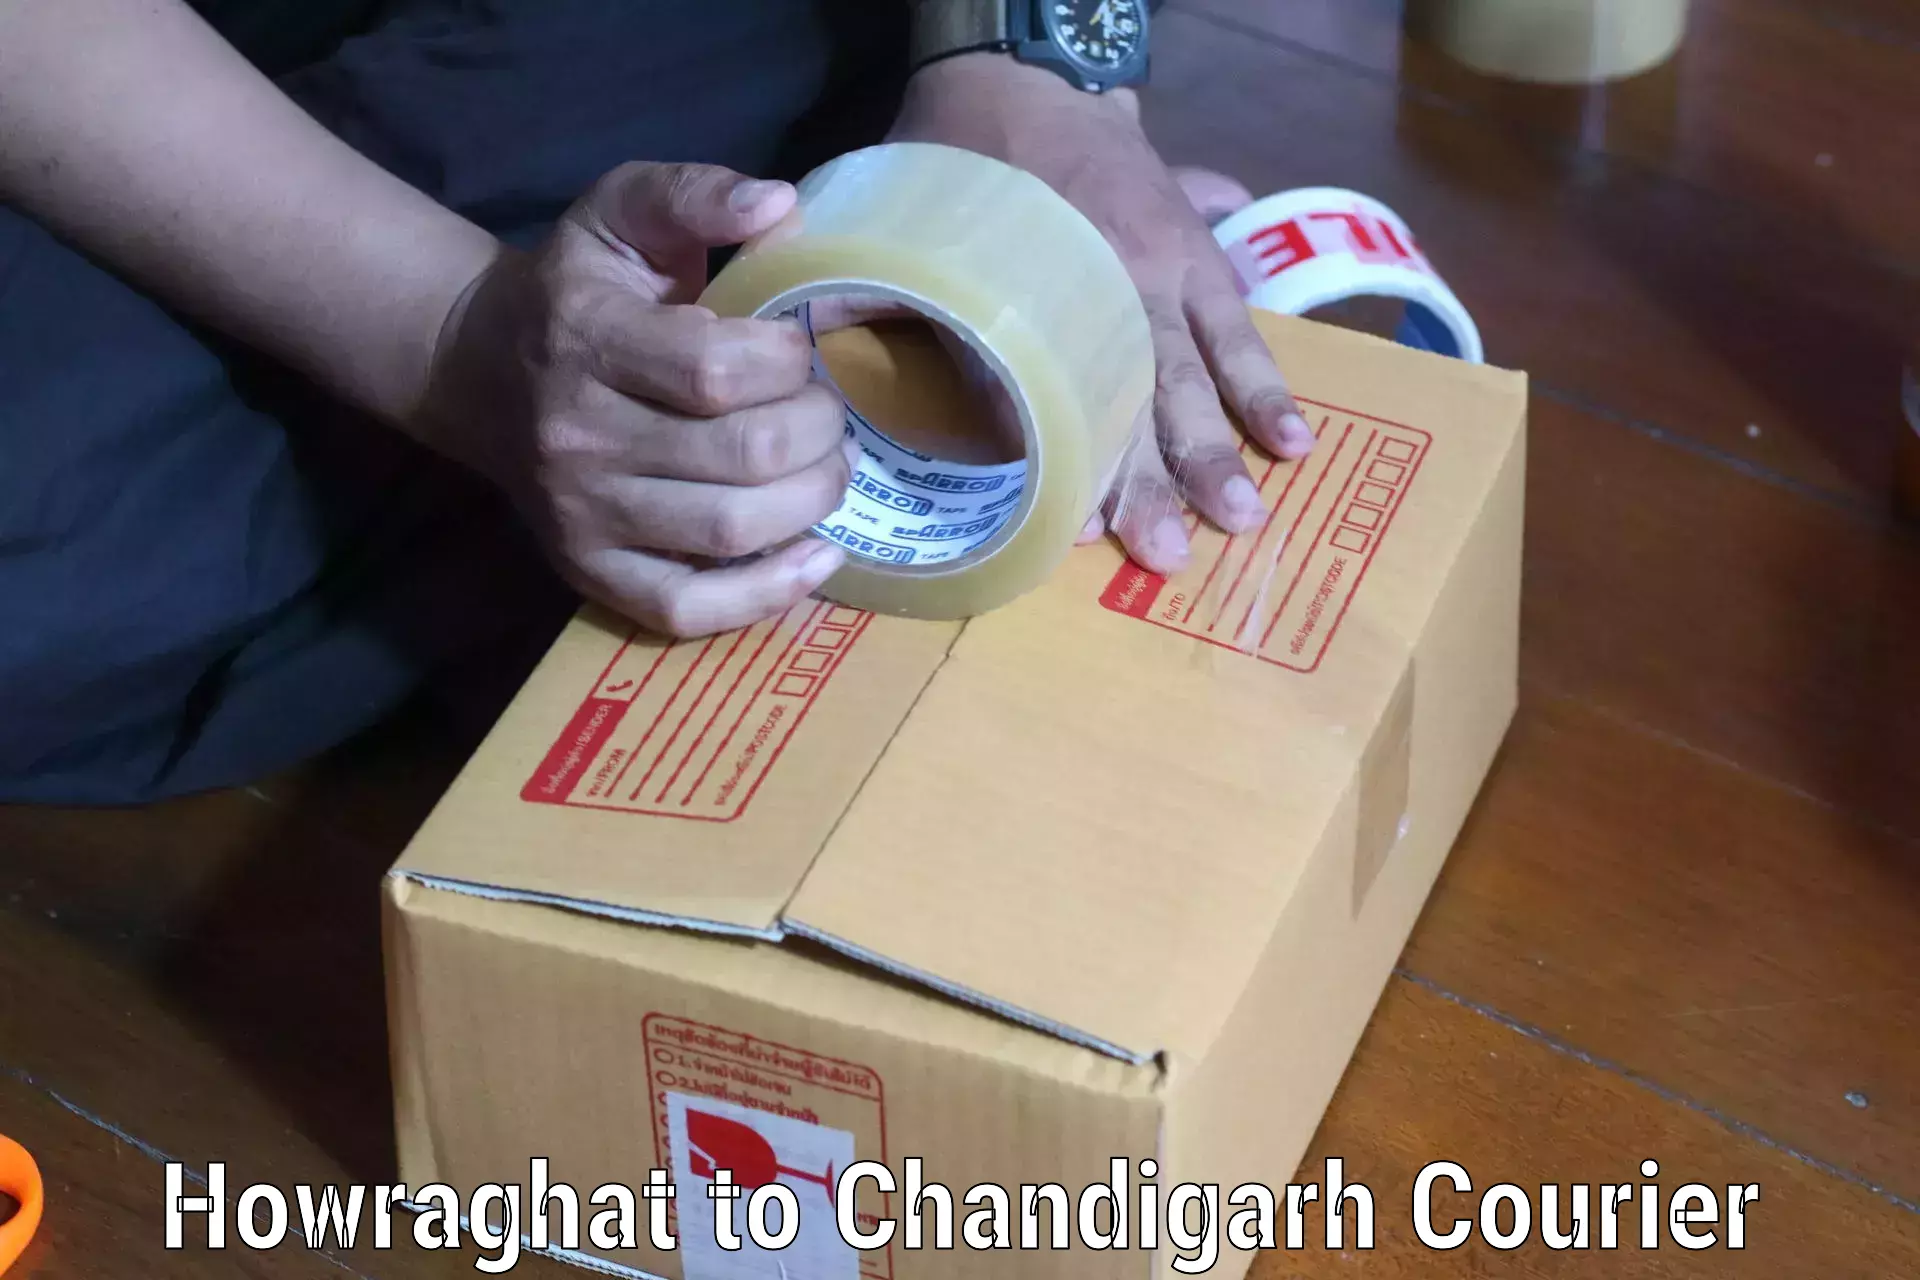 Custom courier packaging Howraghat to Chandigarh